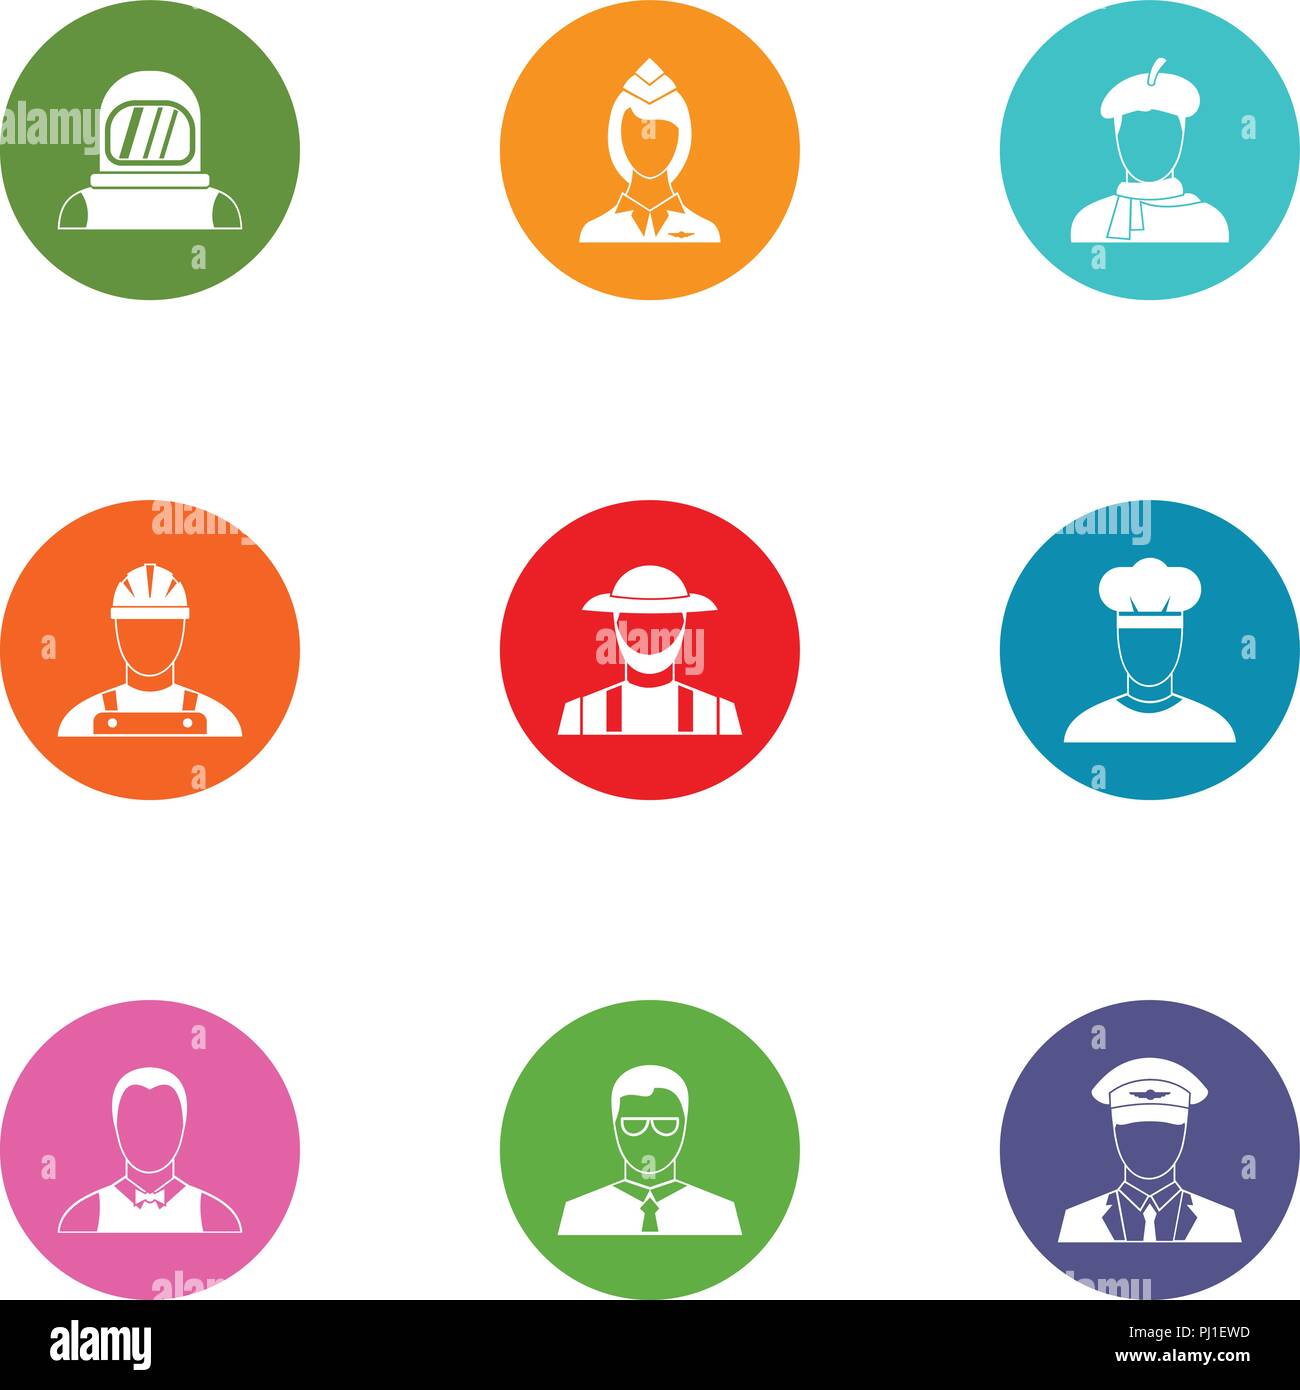 Personalization icons set, flat style Stock Vector